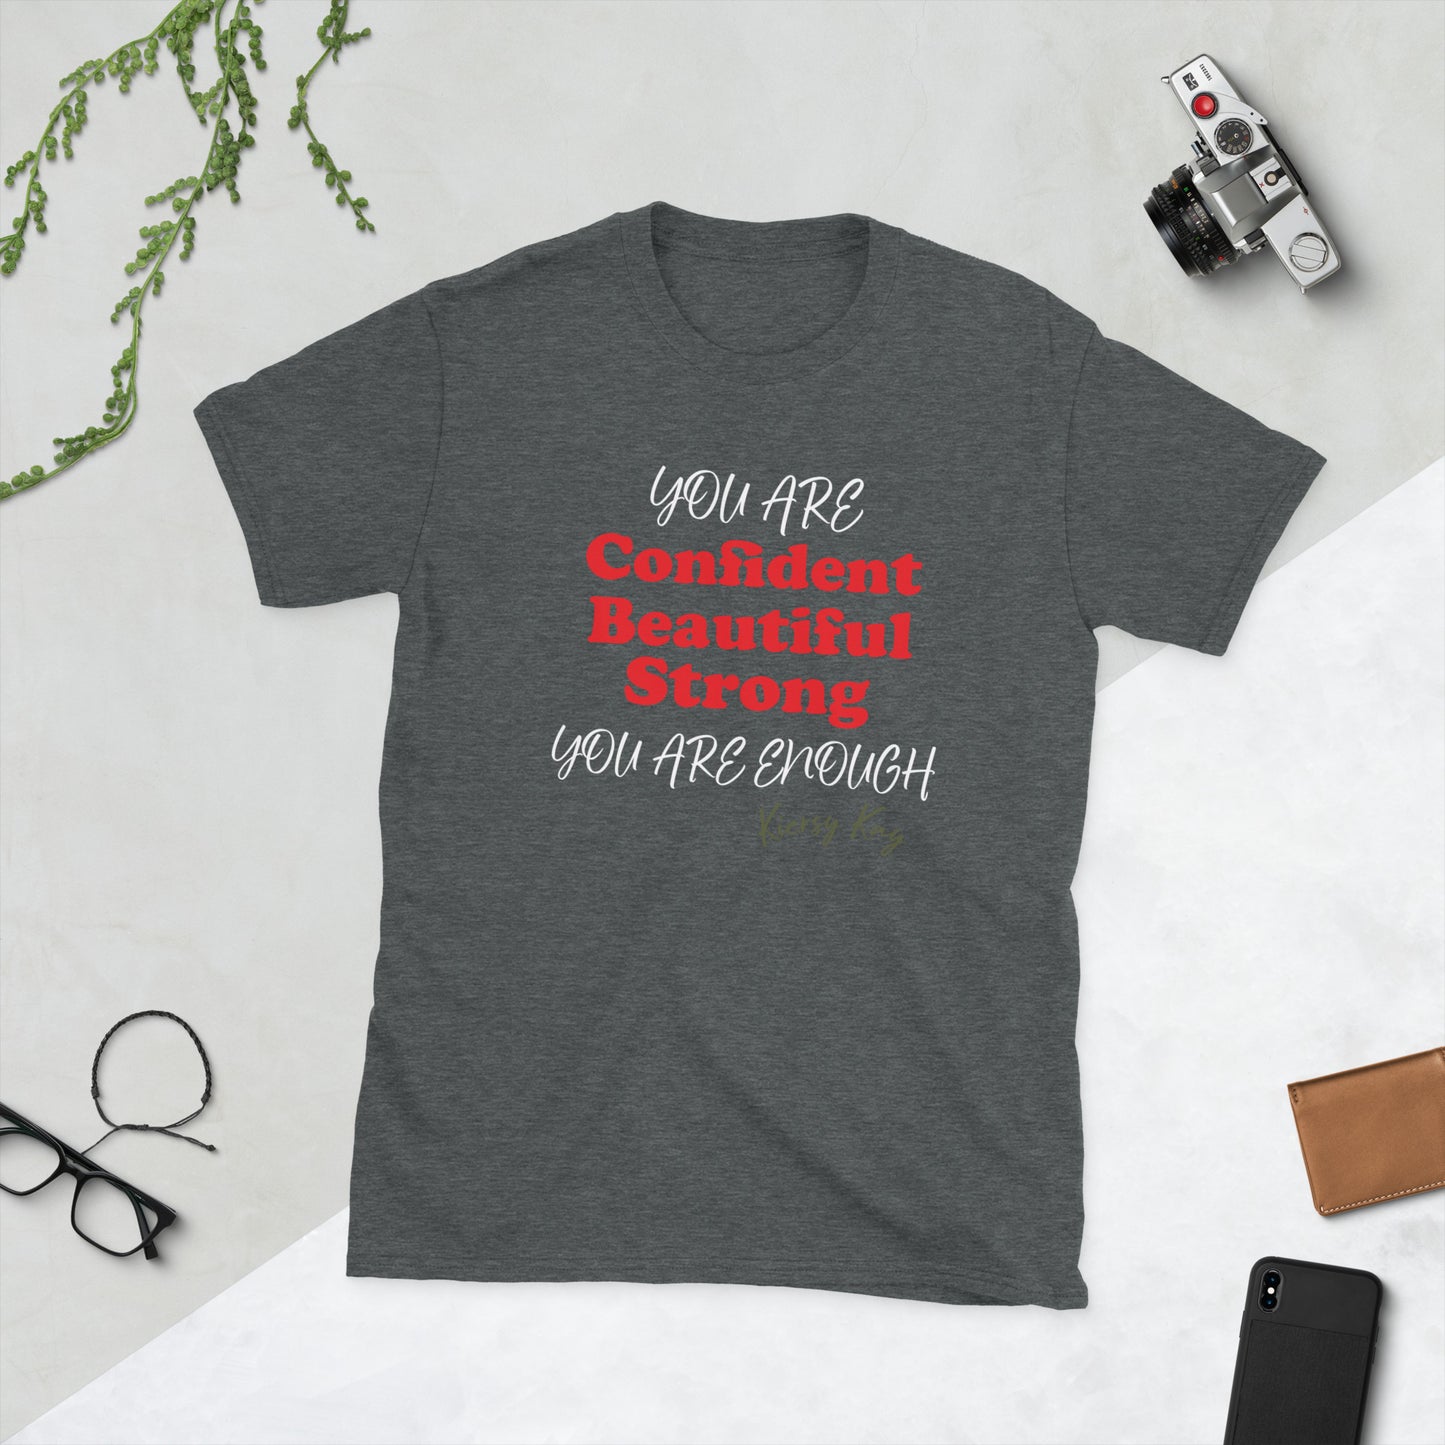 YOU ARE inspirational tshirt